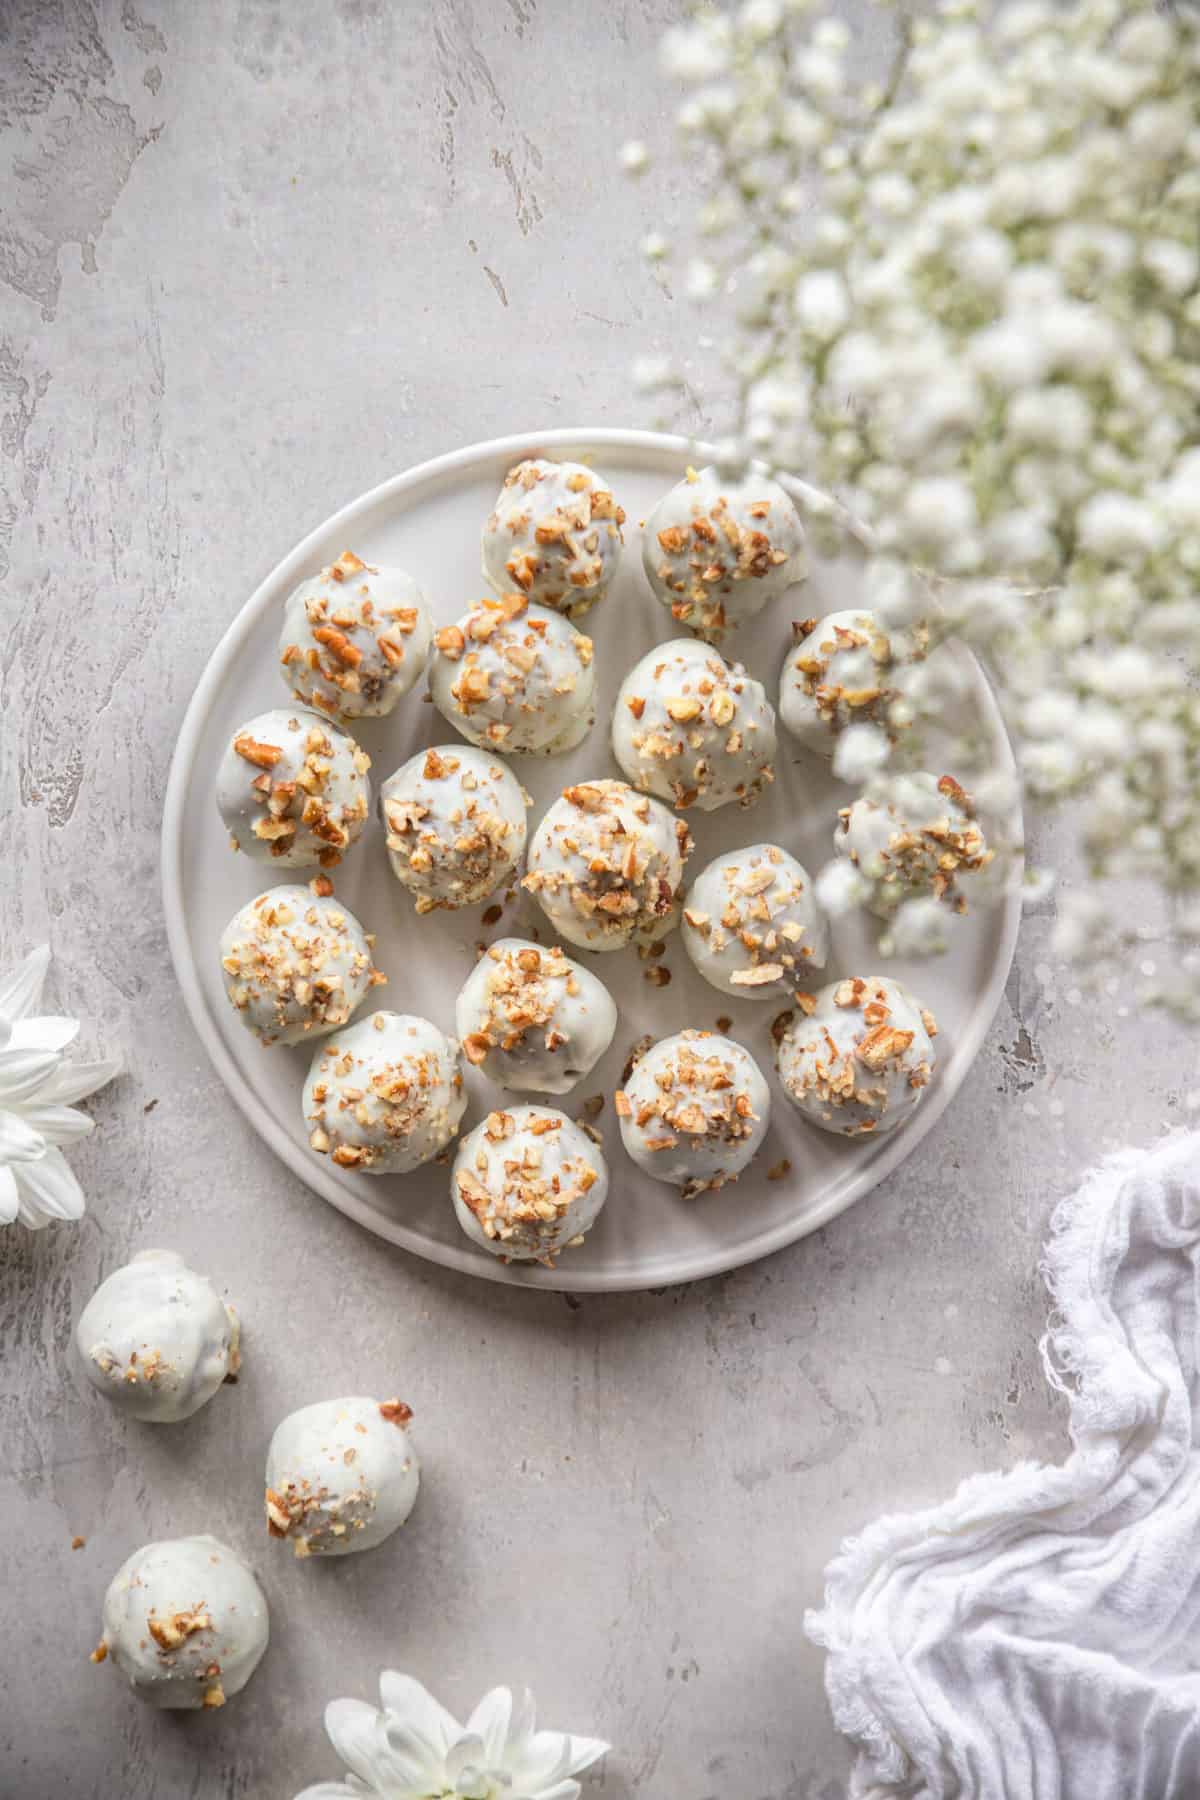 Carrot Cake balls on a plate with some flowers